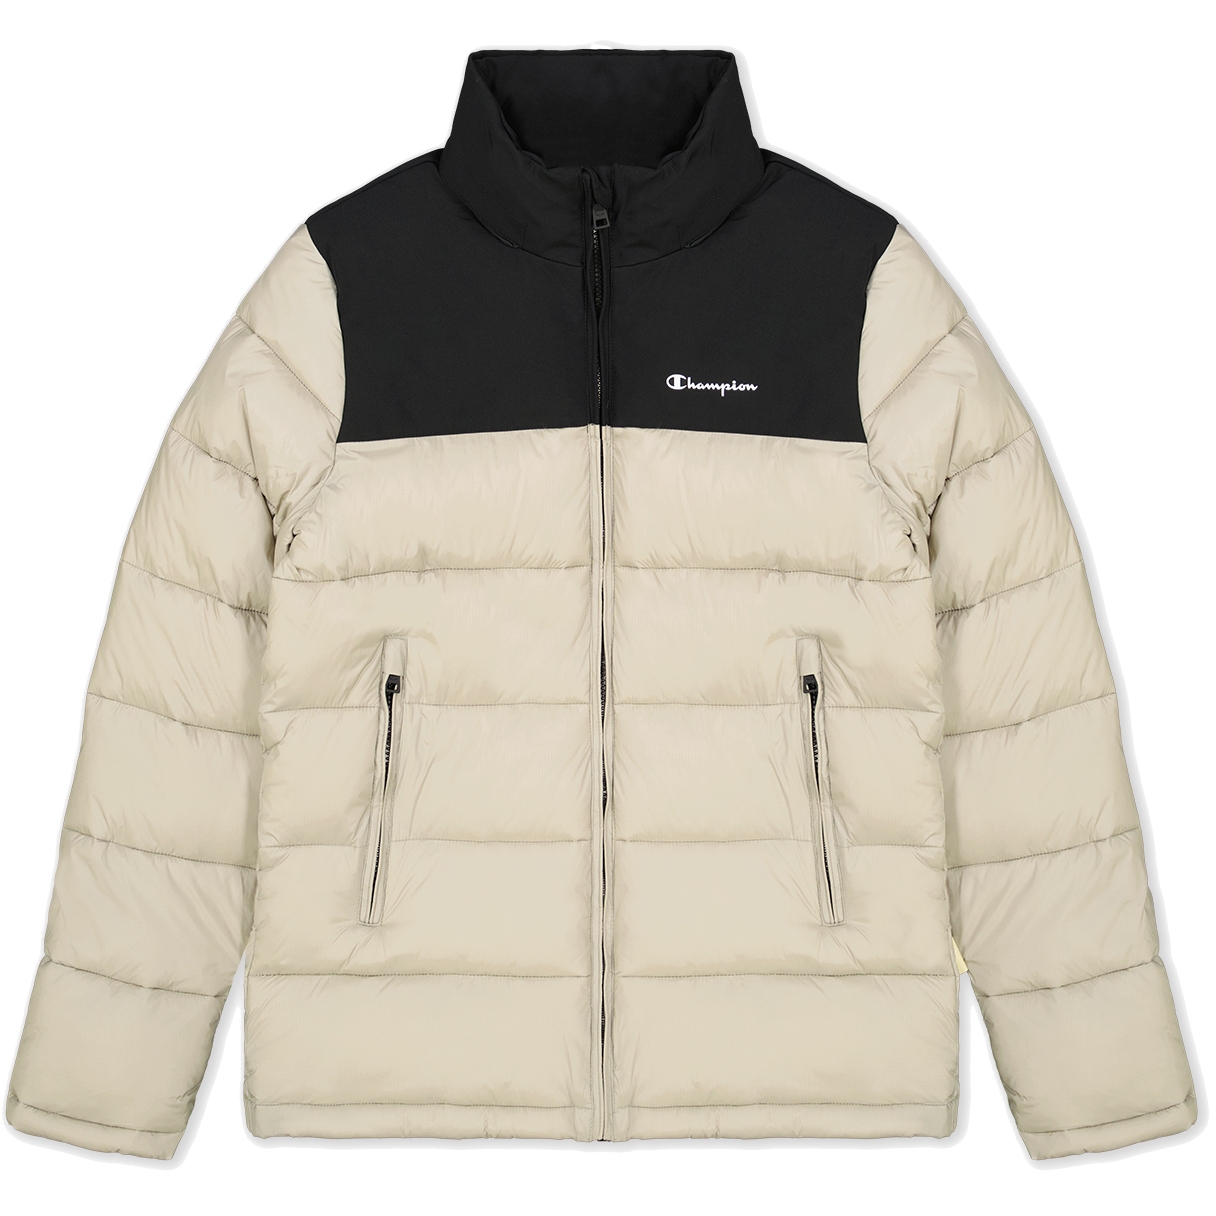 Picture of Champion Legacy Jacket 218079 - abbey stone/black beauty